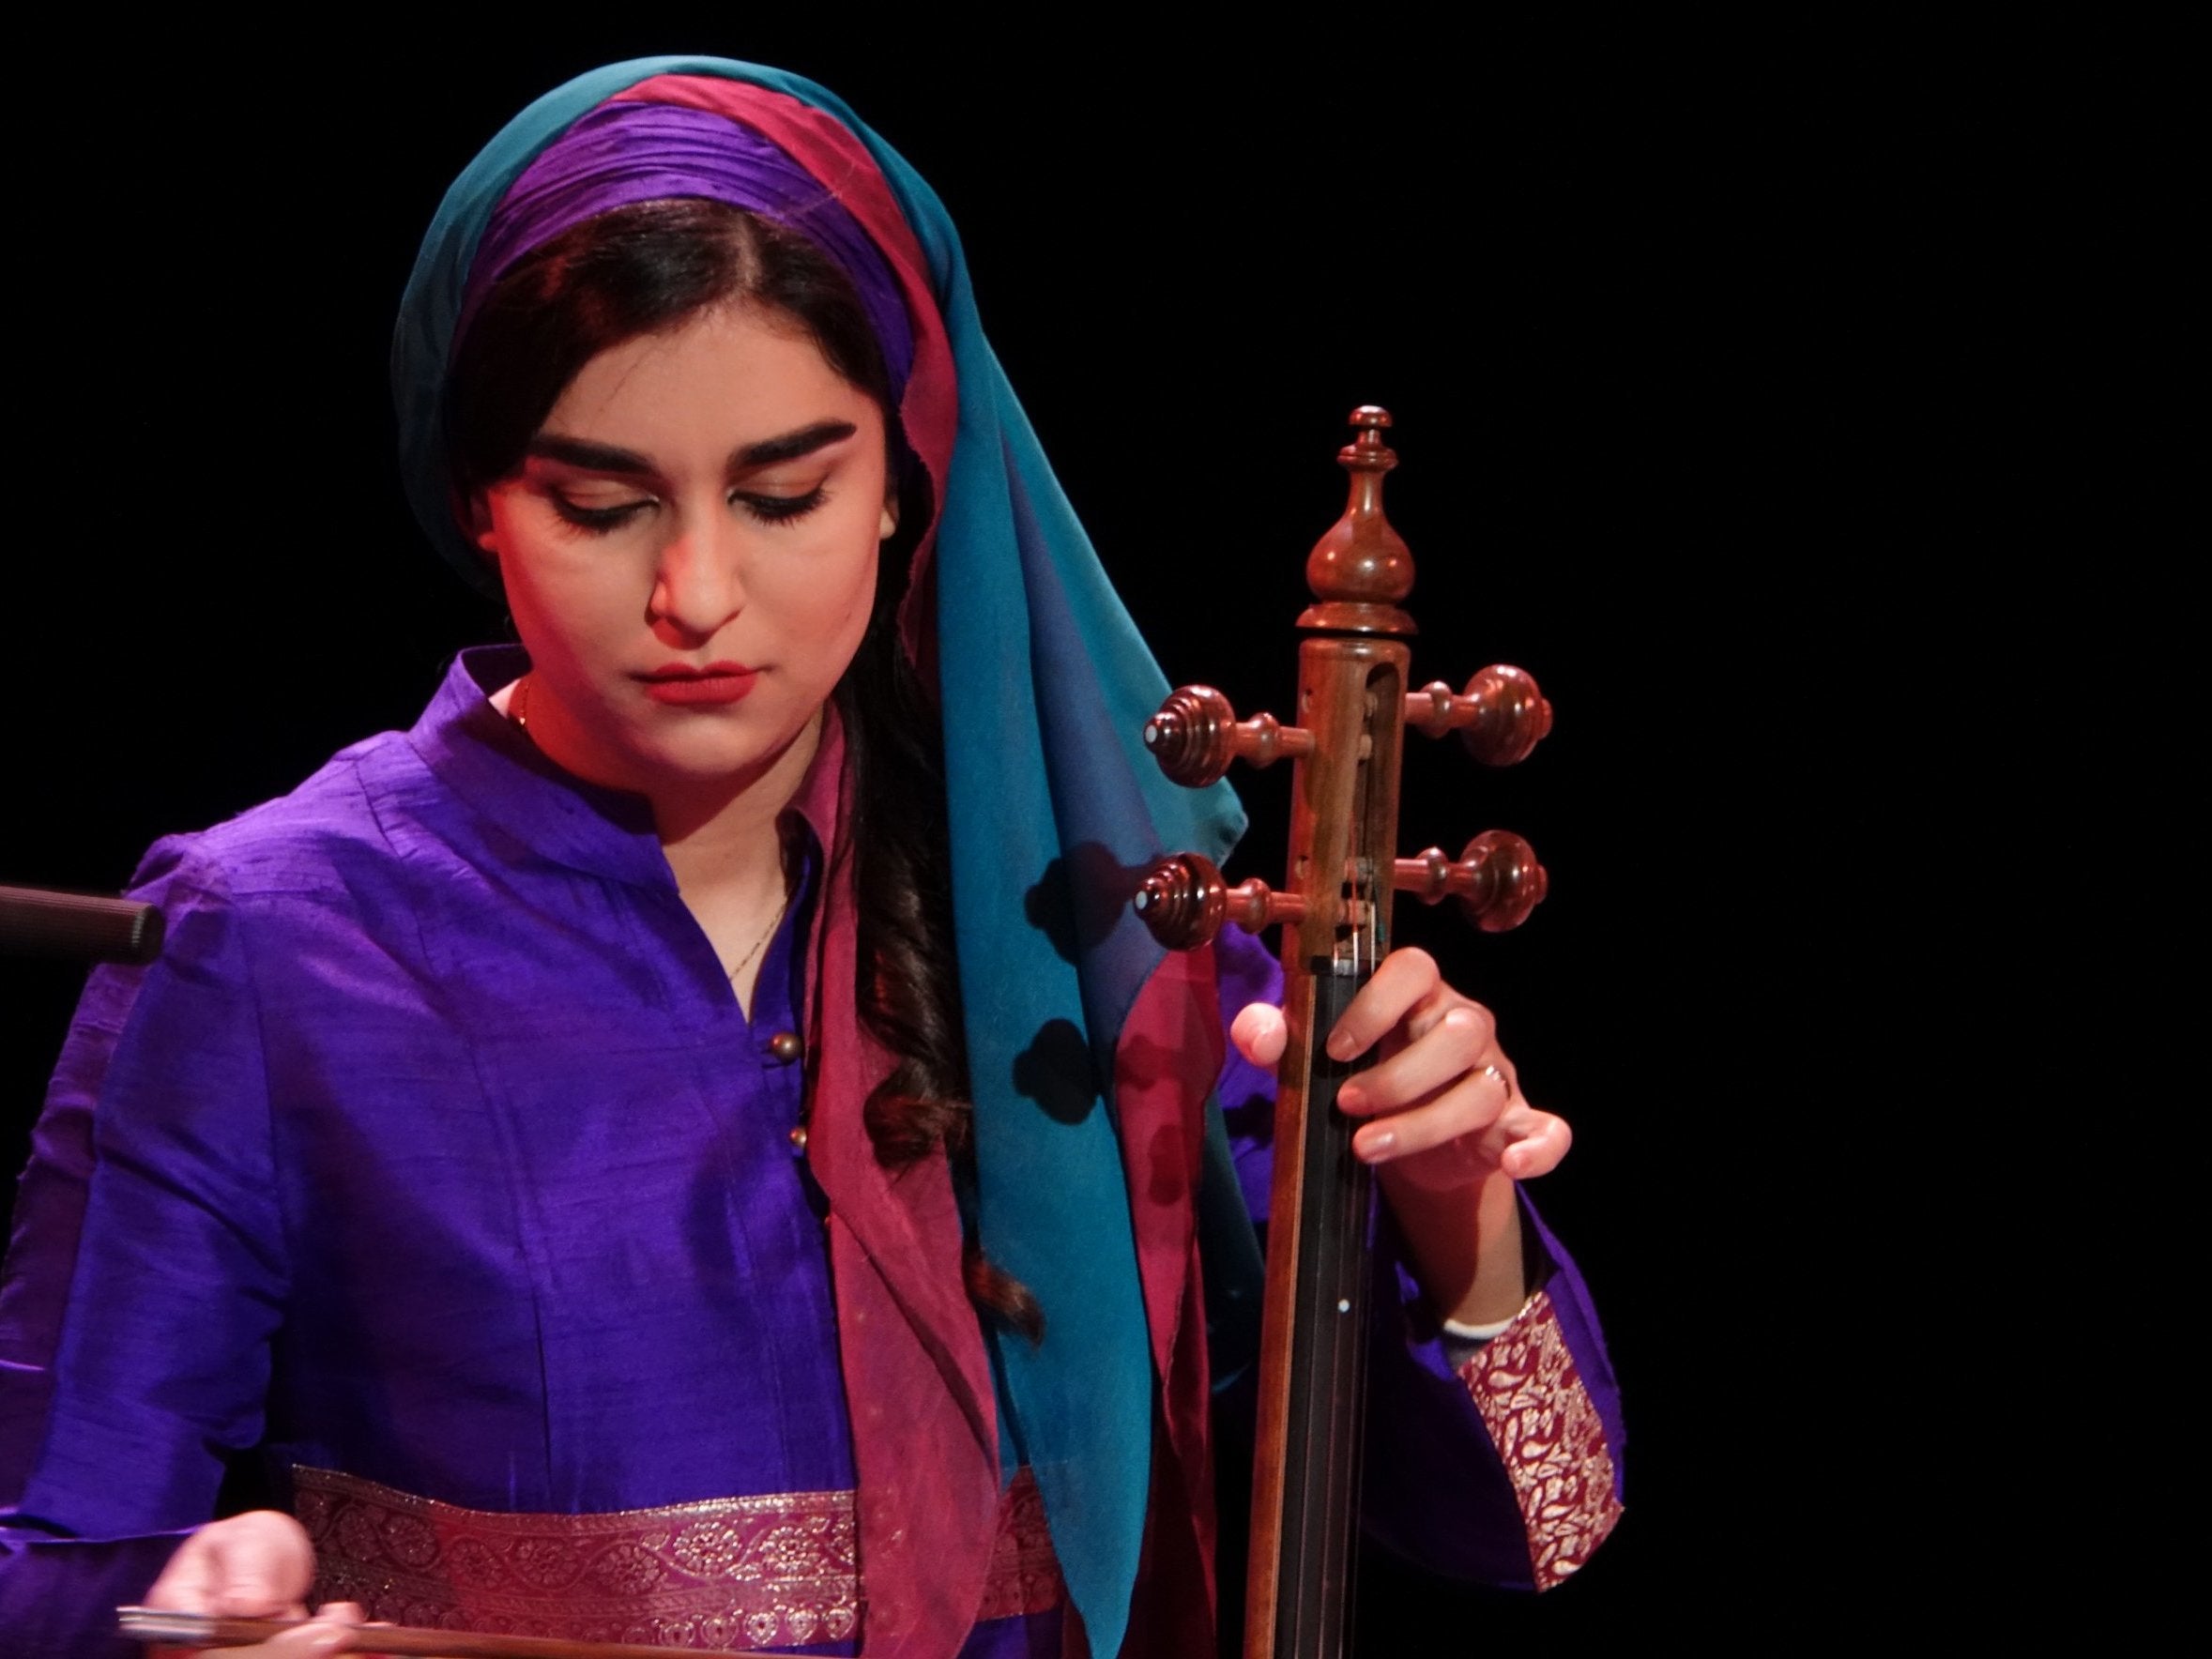 Spike-fiddle virtuoso Nazanin Ghanizadeh gave some exquisite solos